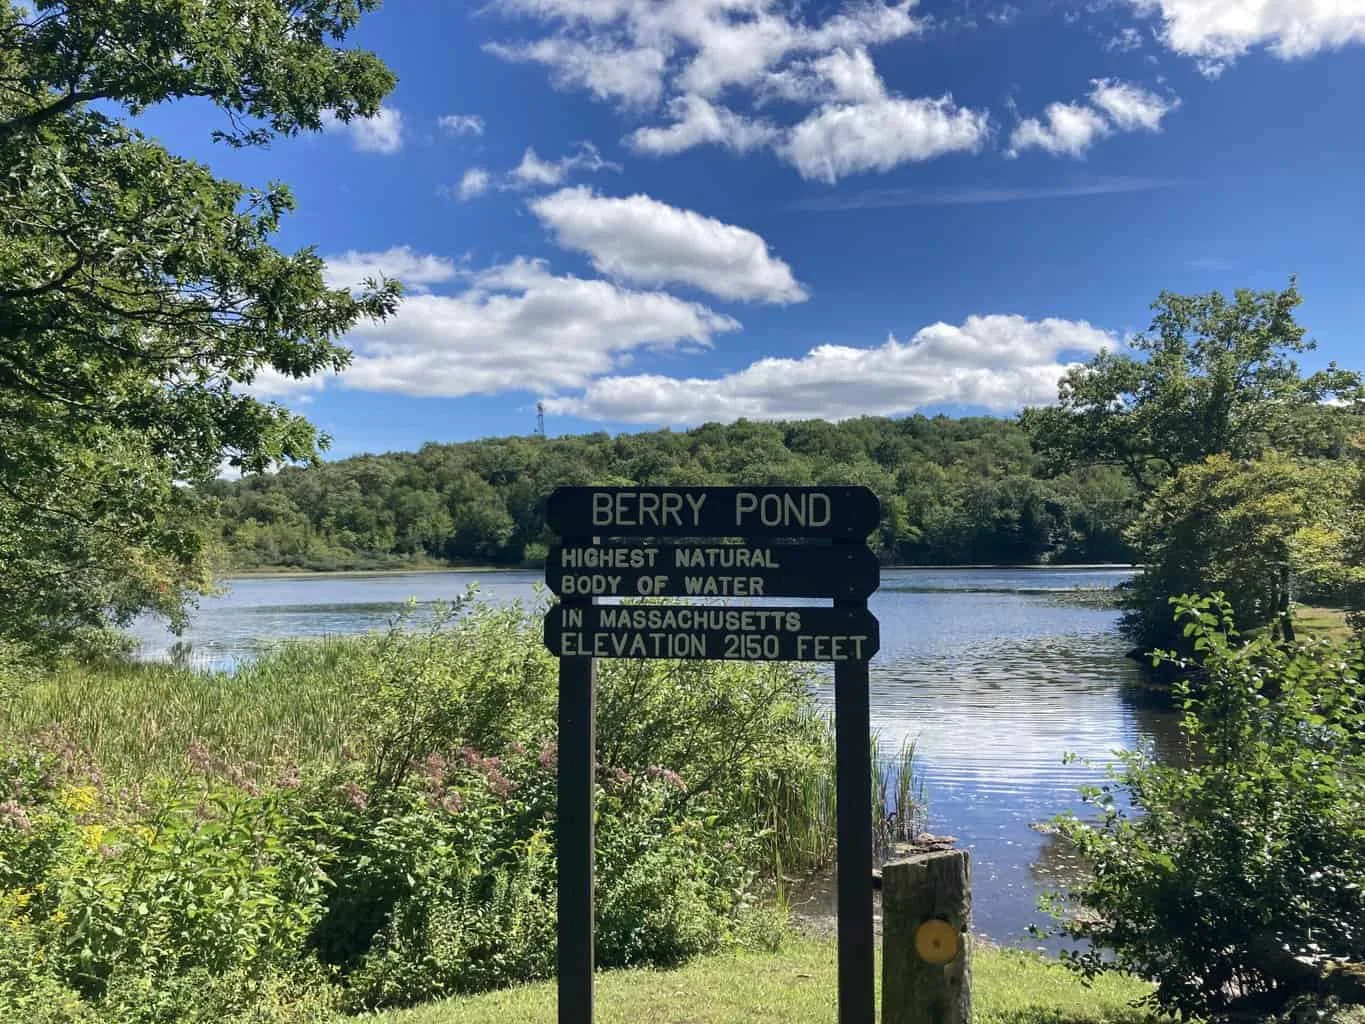 Berry Pond in Pittsfield State Forest in Massachusetts.